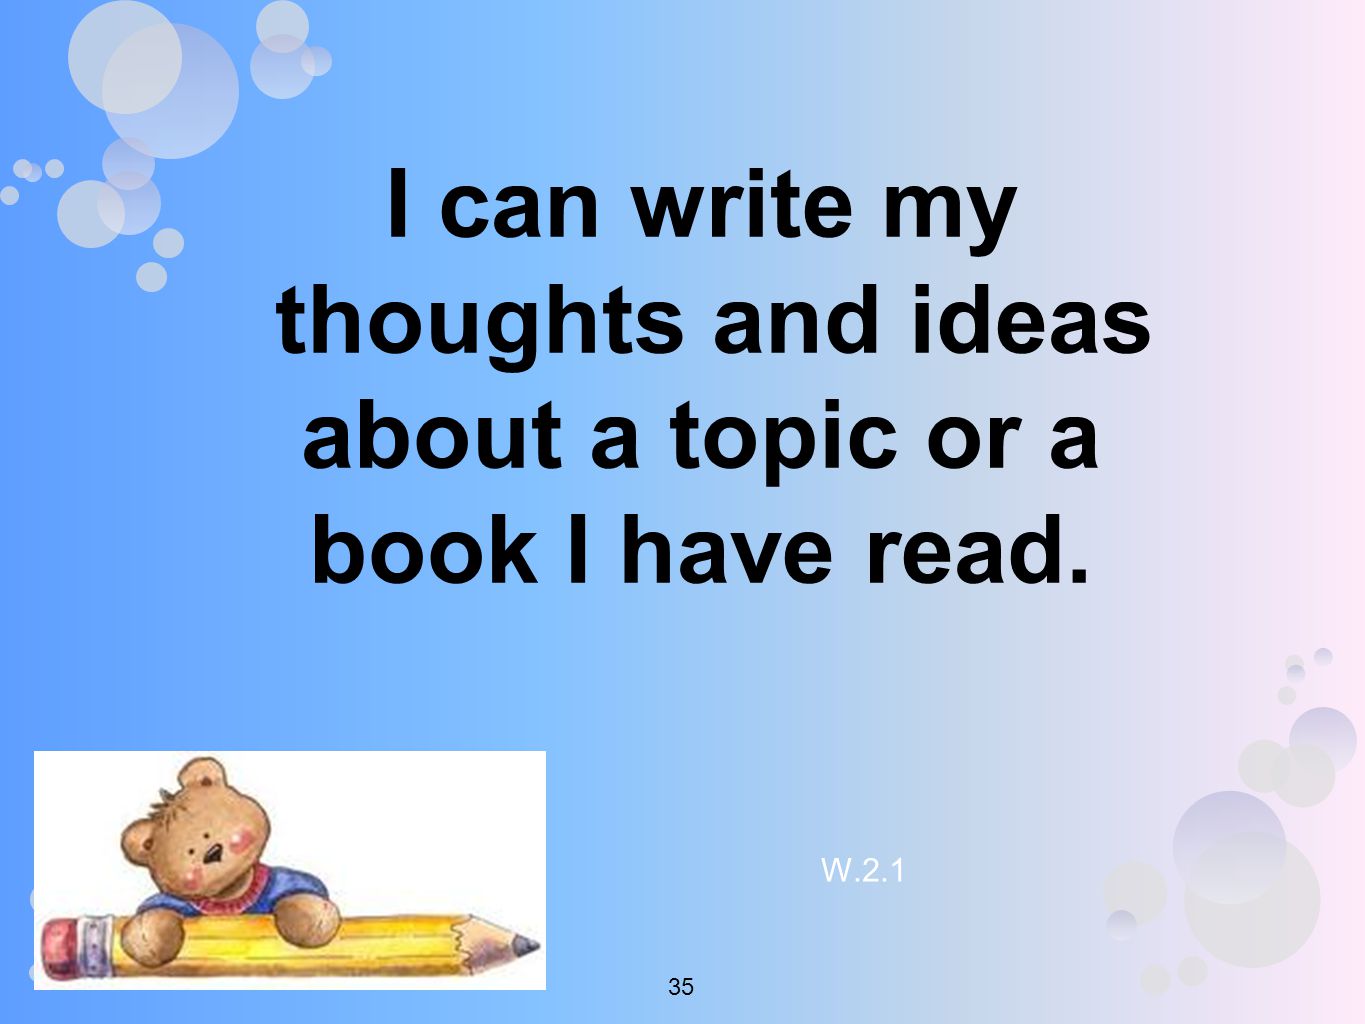 I can write my thoughts and ideas about a topic or a book I have read. W